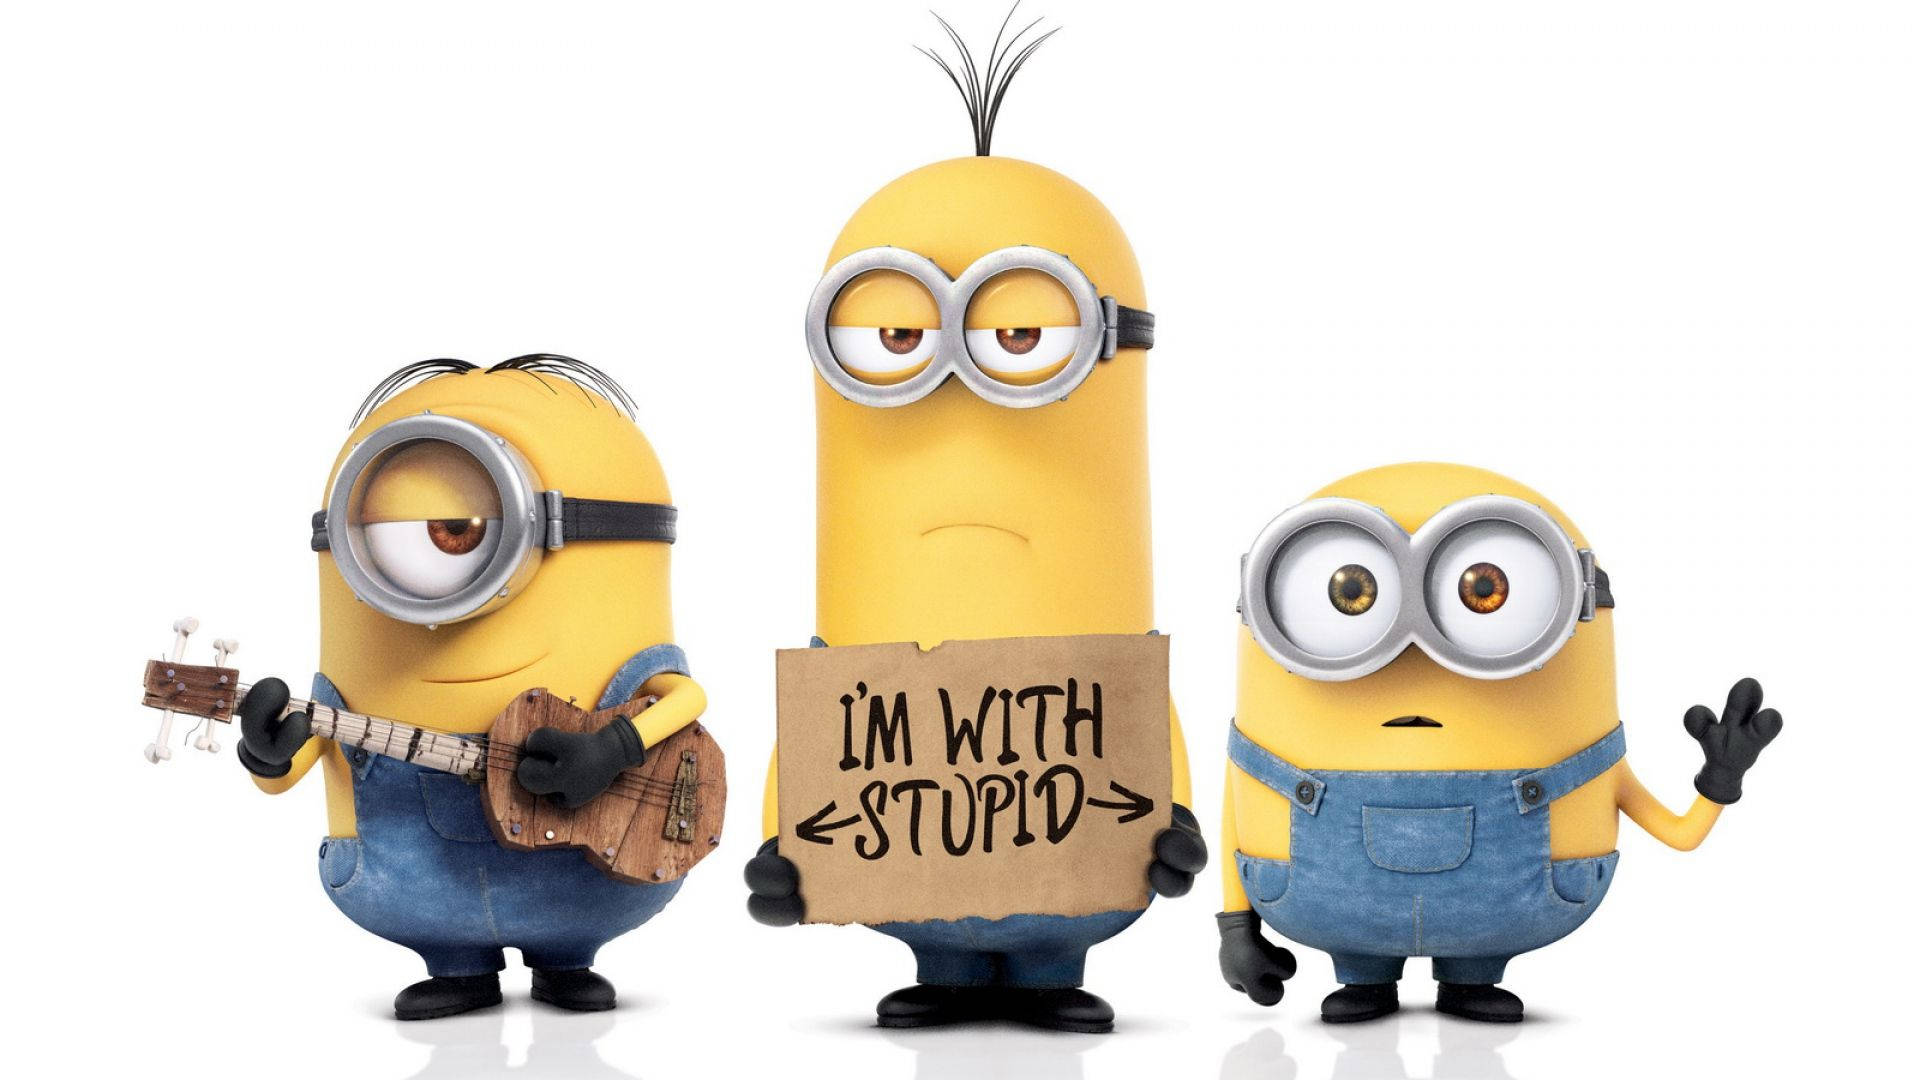 Minions Bob, Kevin, and Stuart enjoying a day out in the sunshine Wallpaper